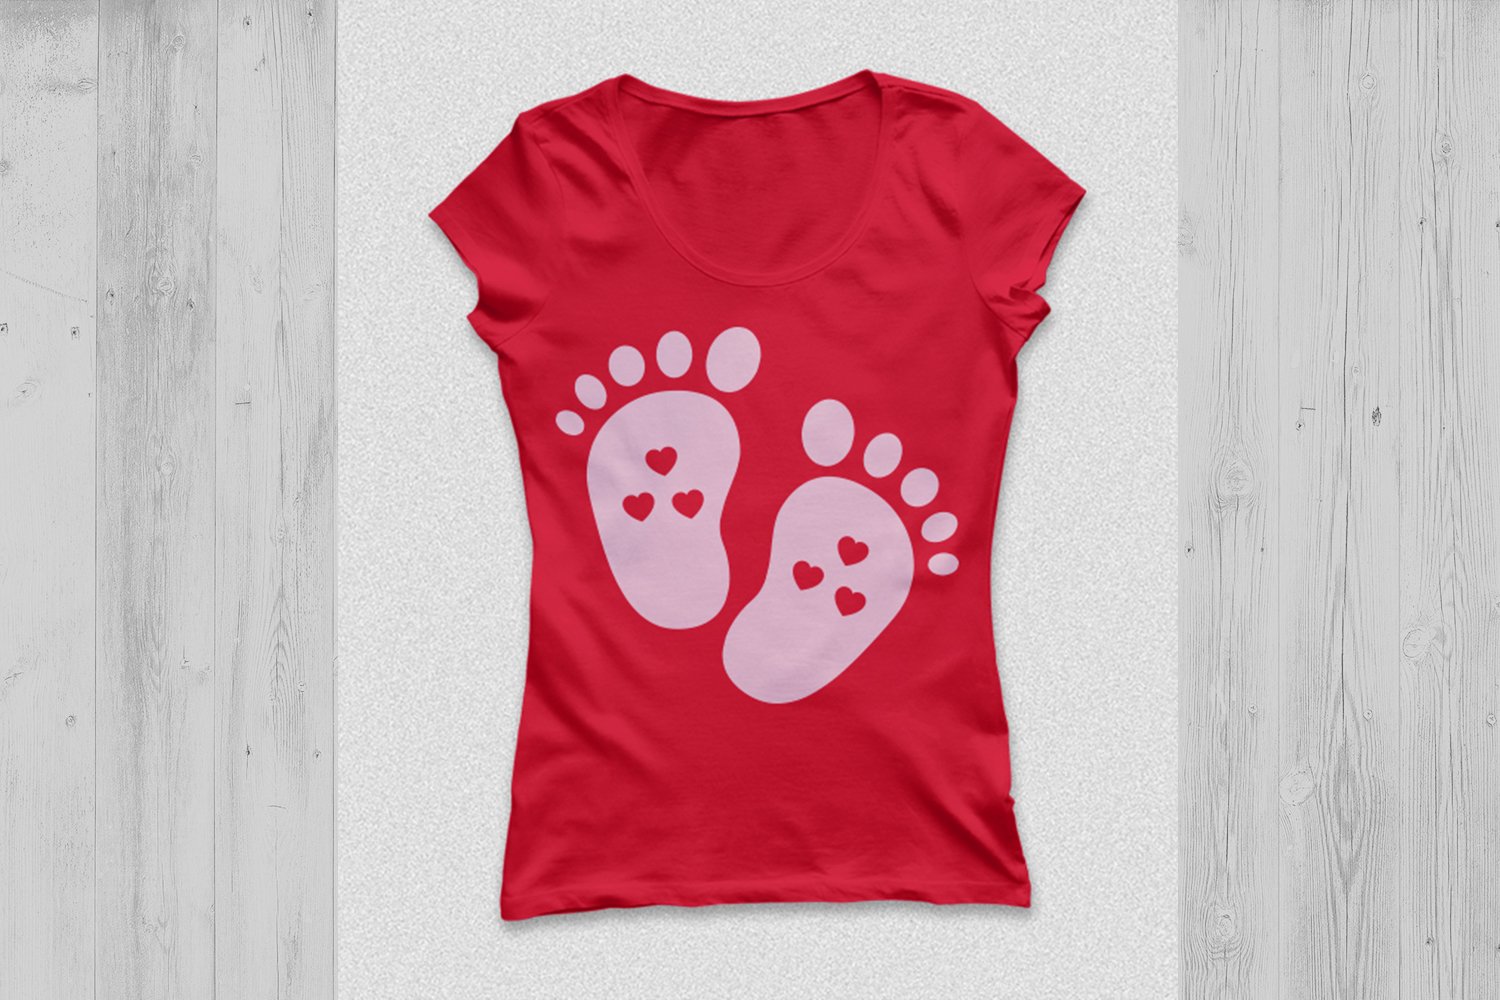 Women's red t-shirt with feet.